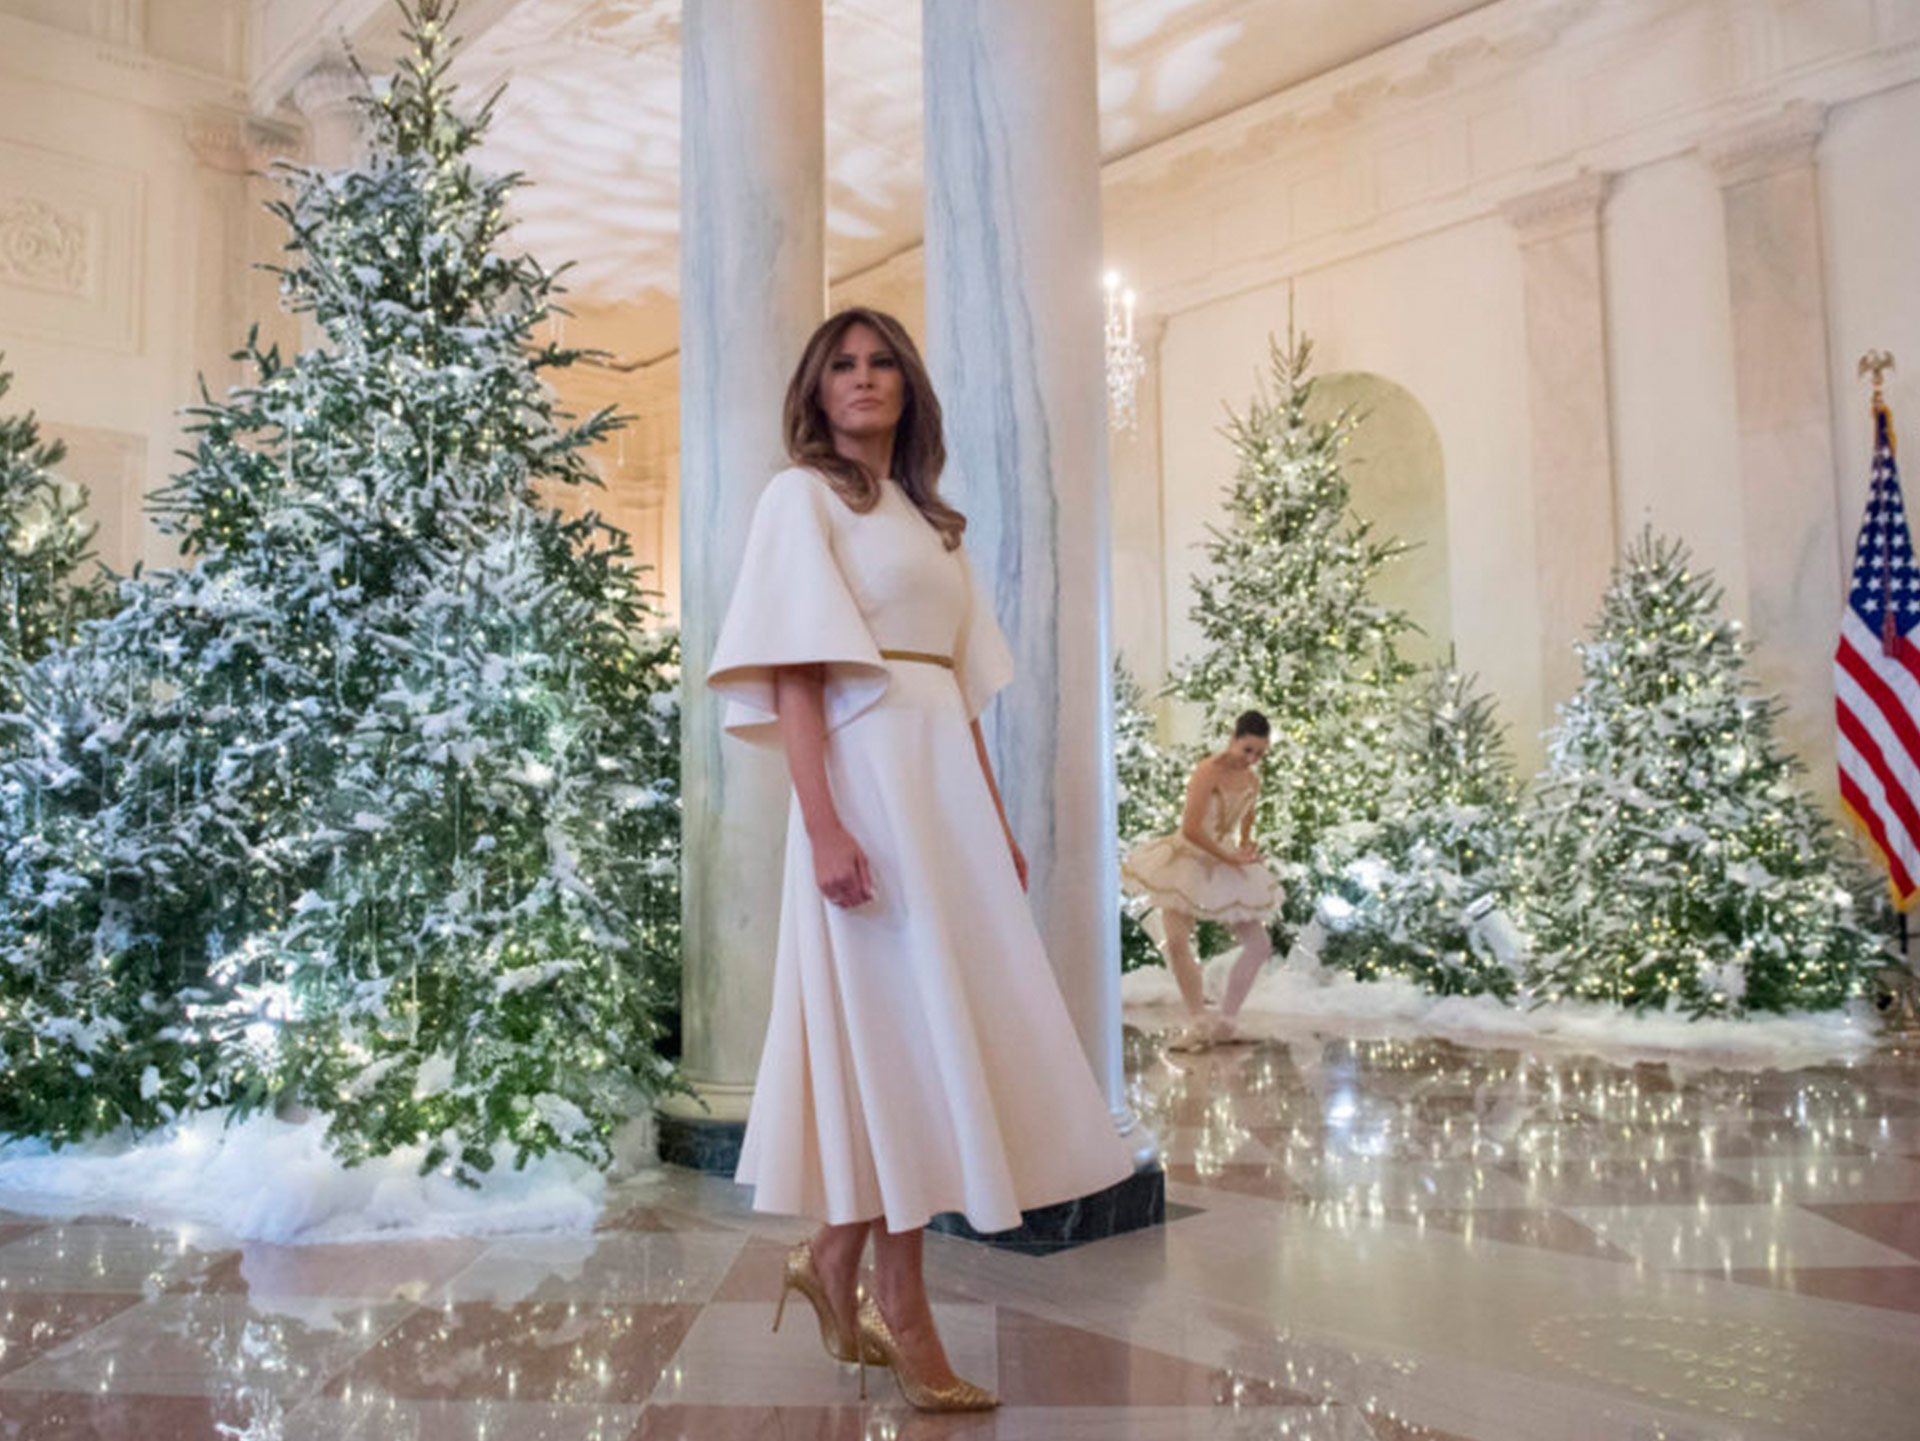 The first Trump White House Christmas is a next level festive display